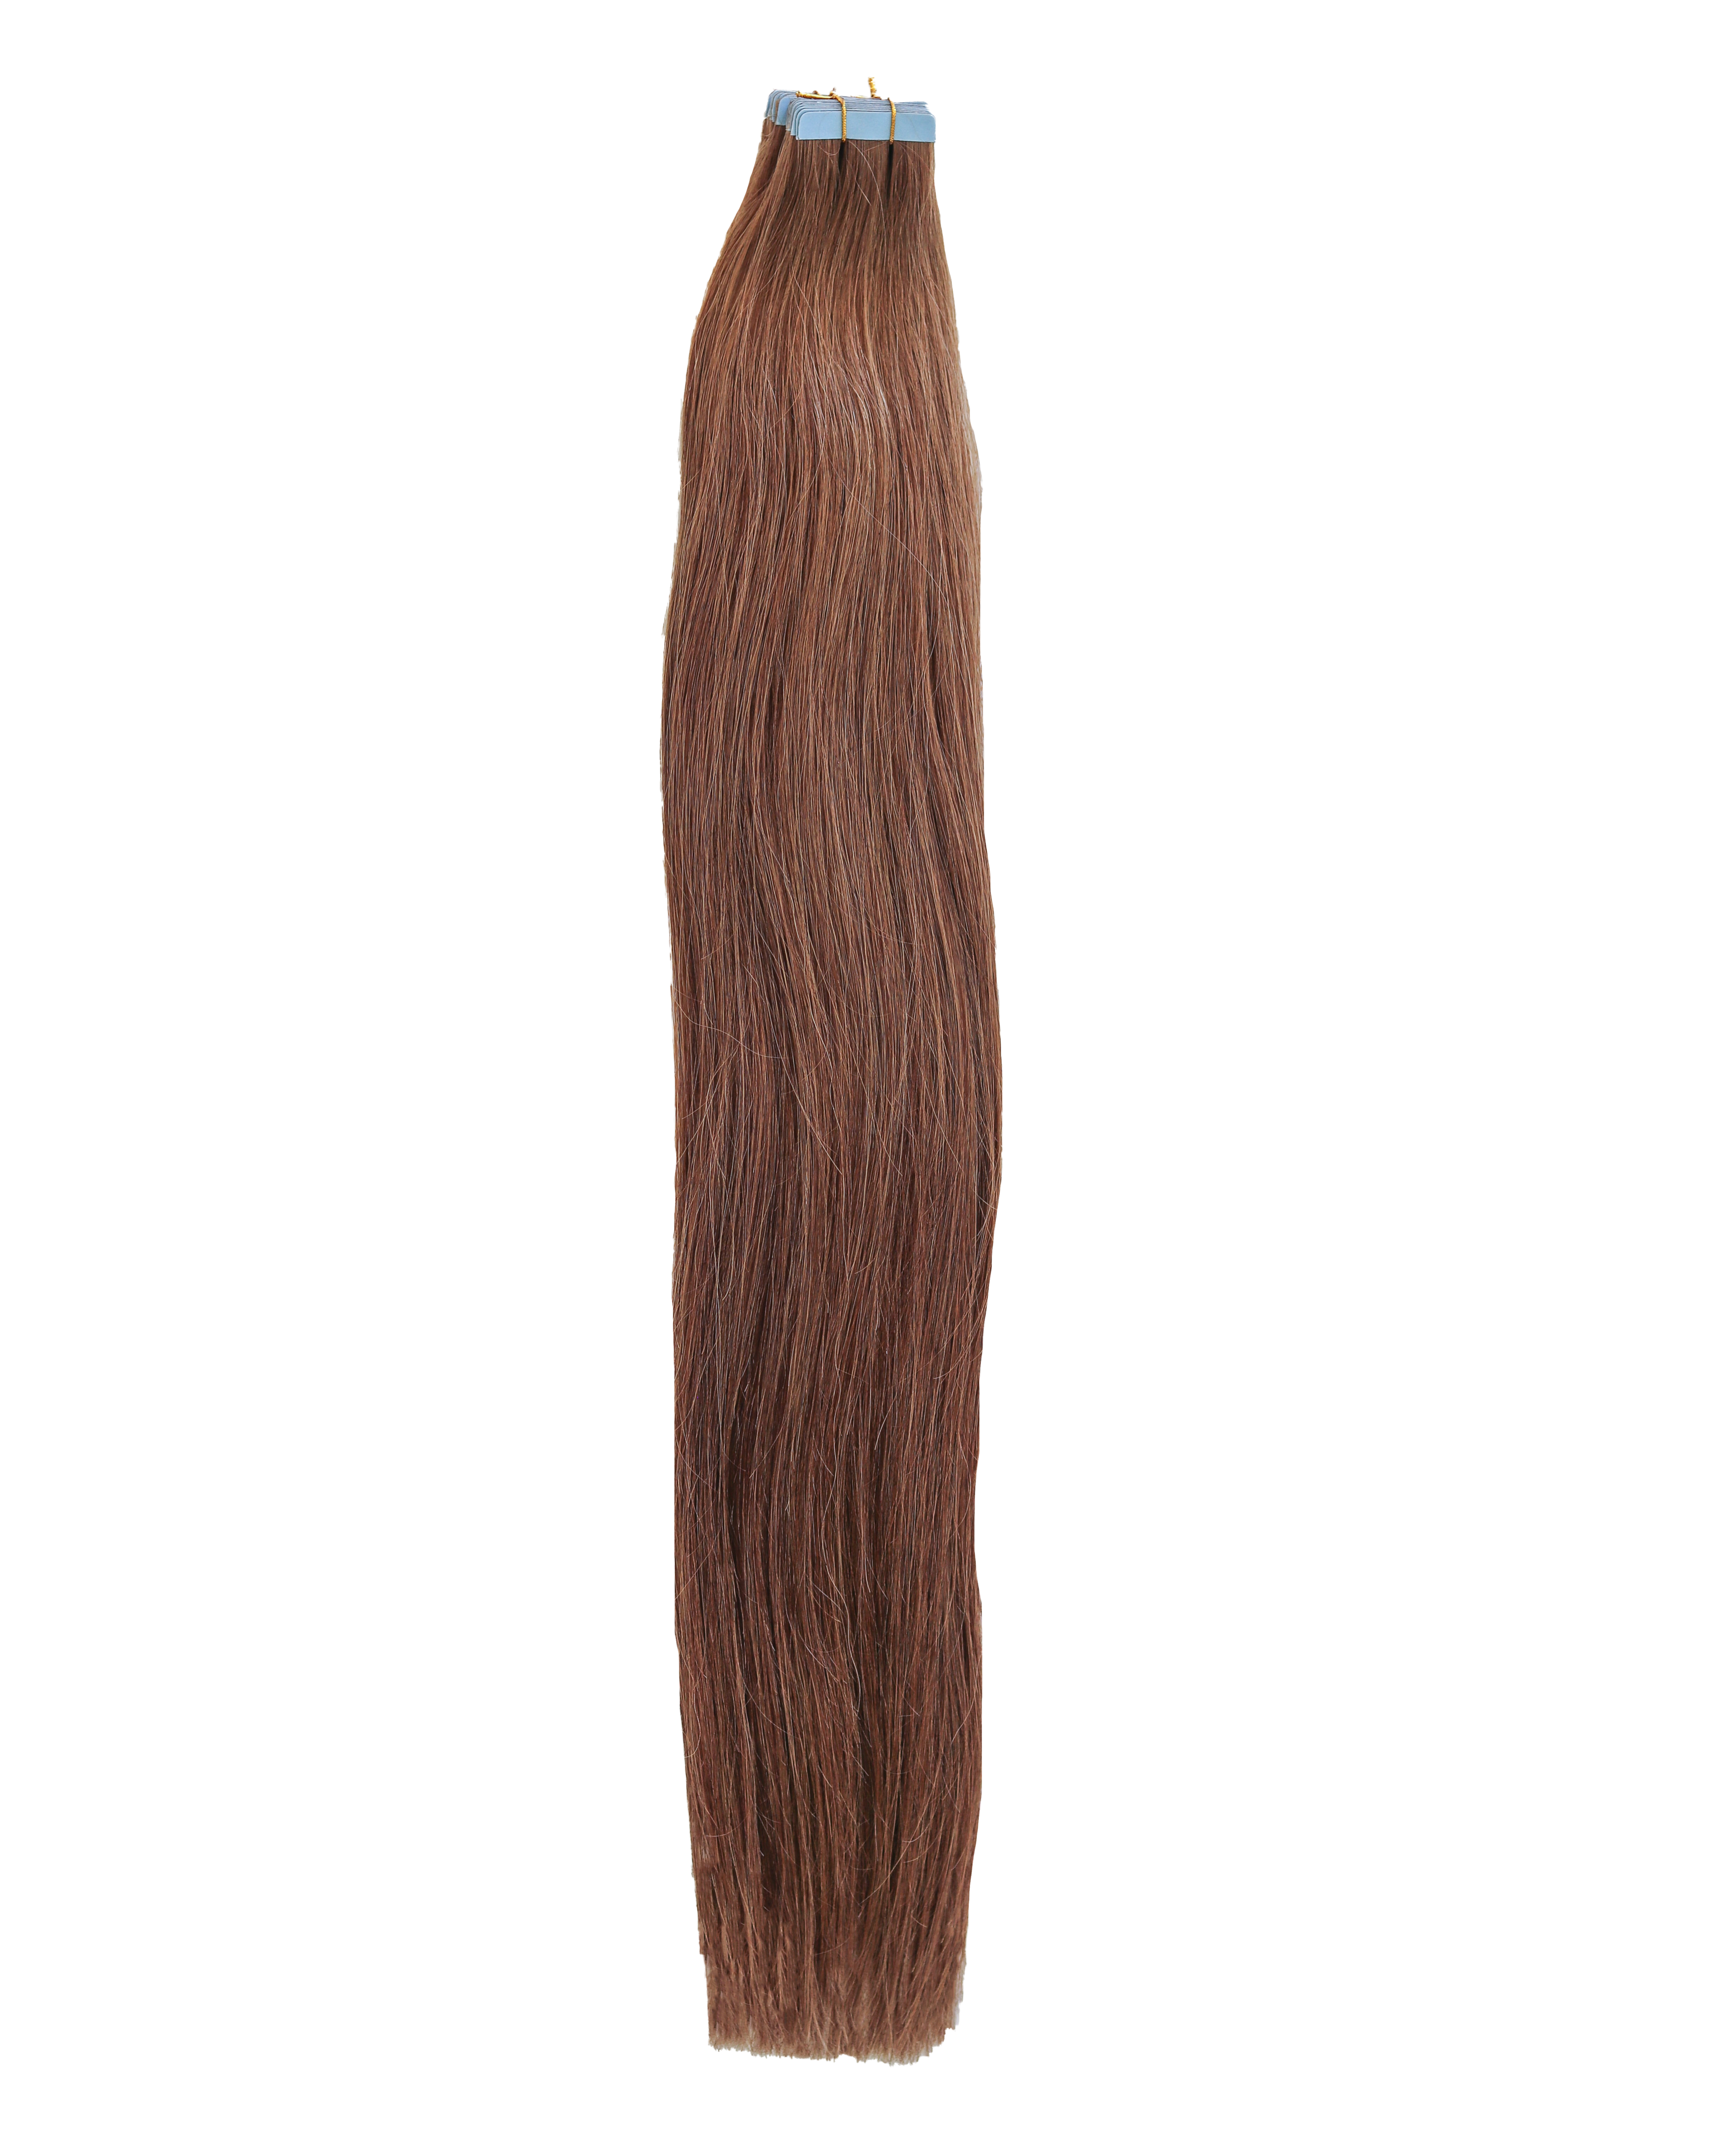 24" RICH BROWN Russian Hair Tape Extensions 20pc